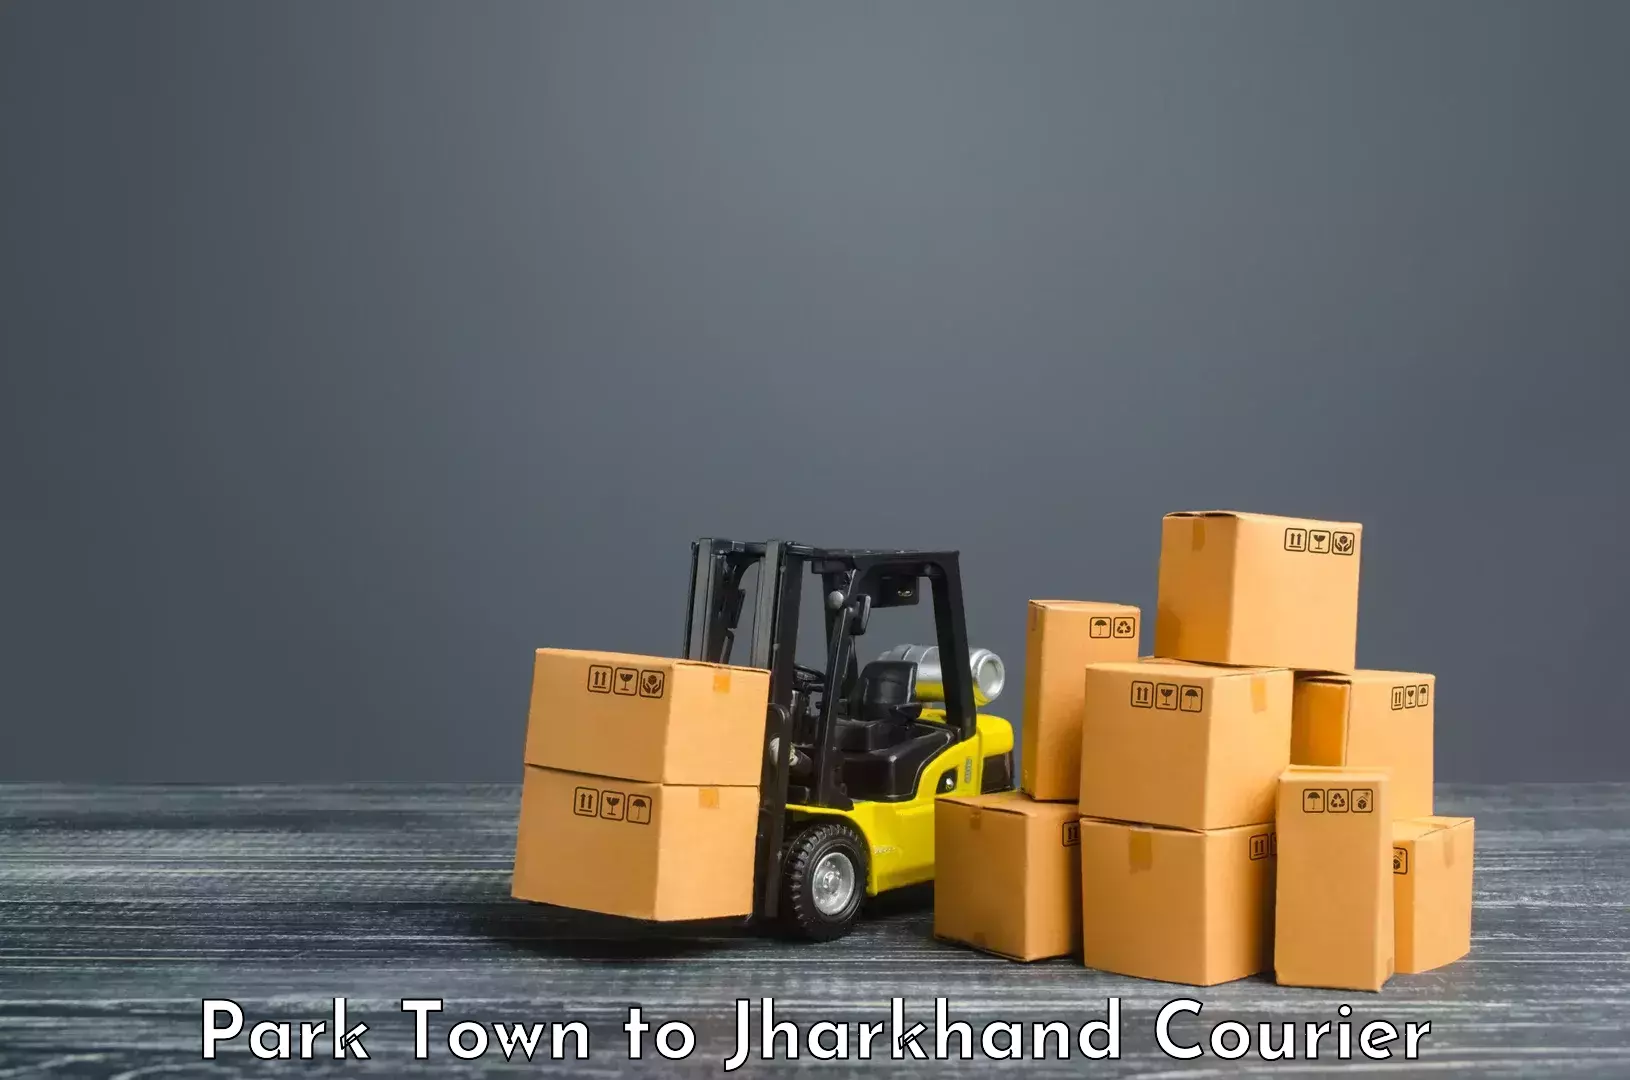 Efficient order fulfillment Park Town to IIT Dhanbad